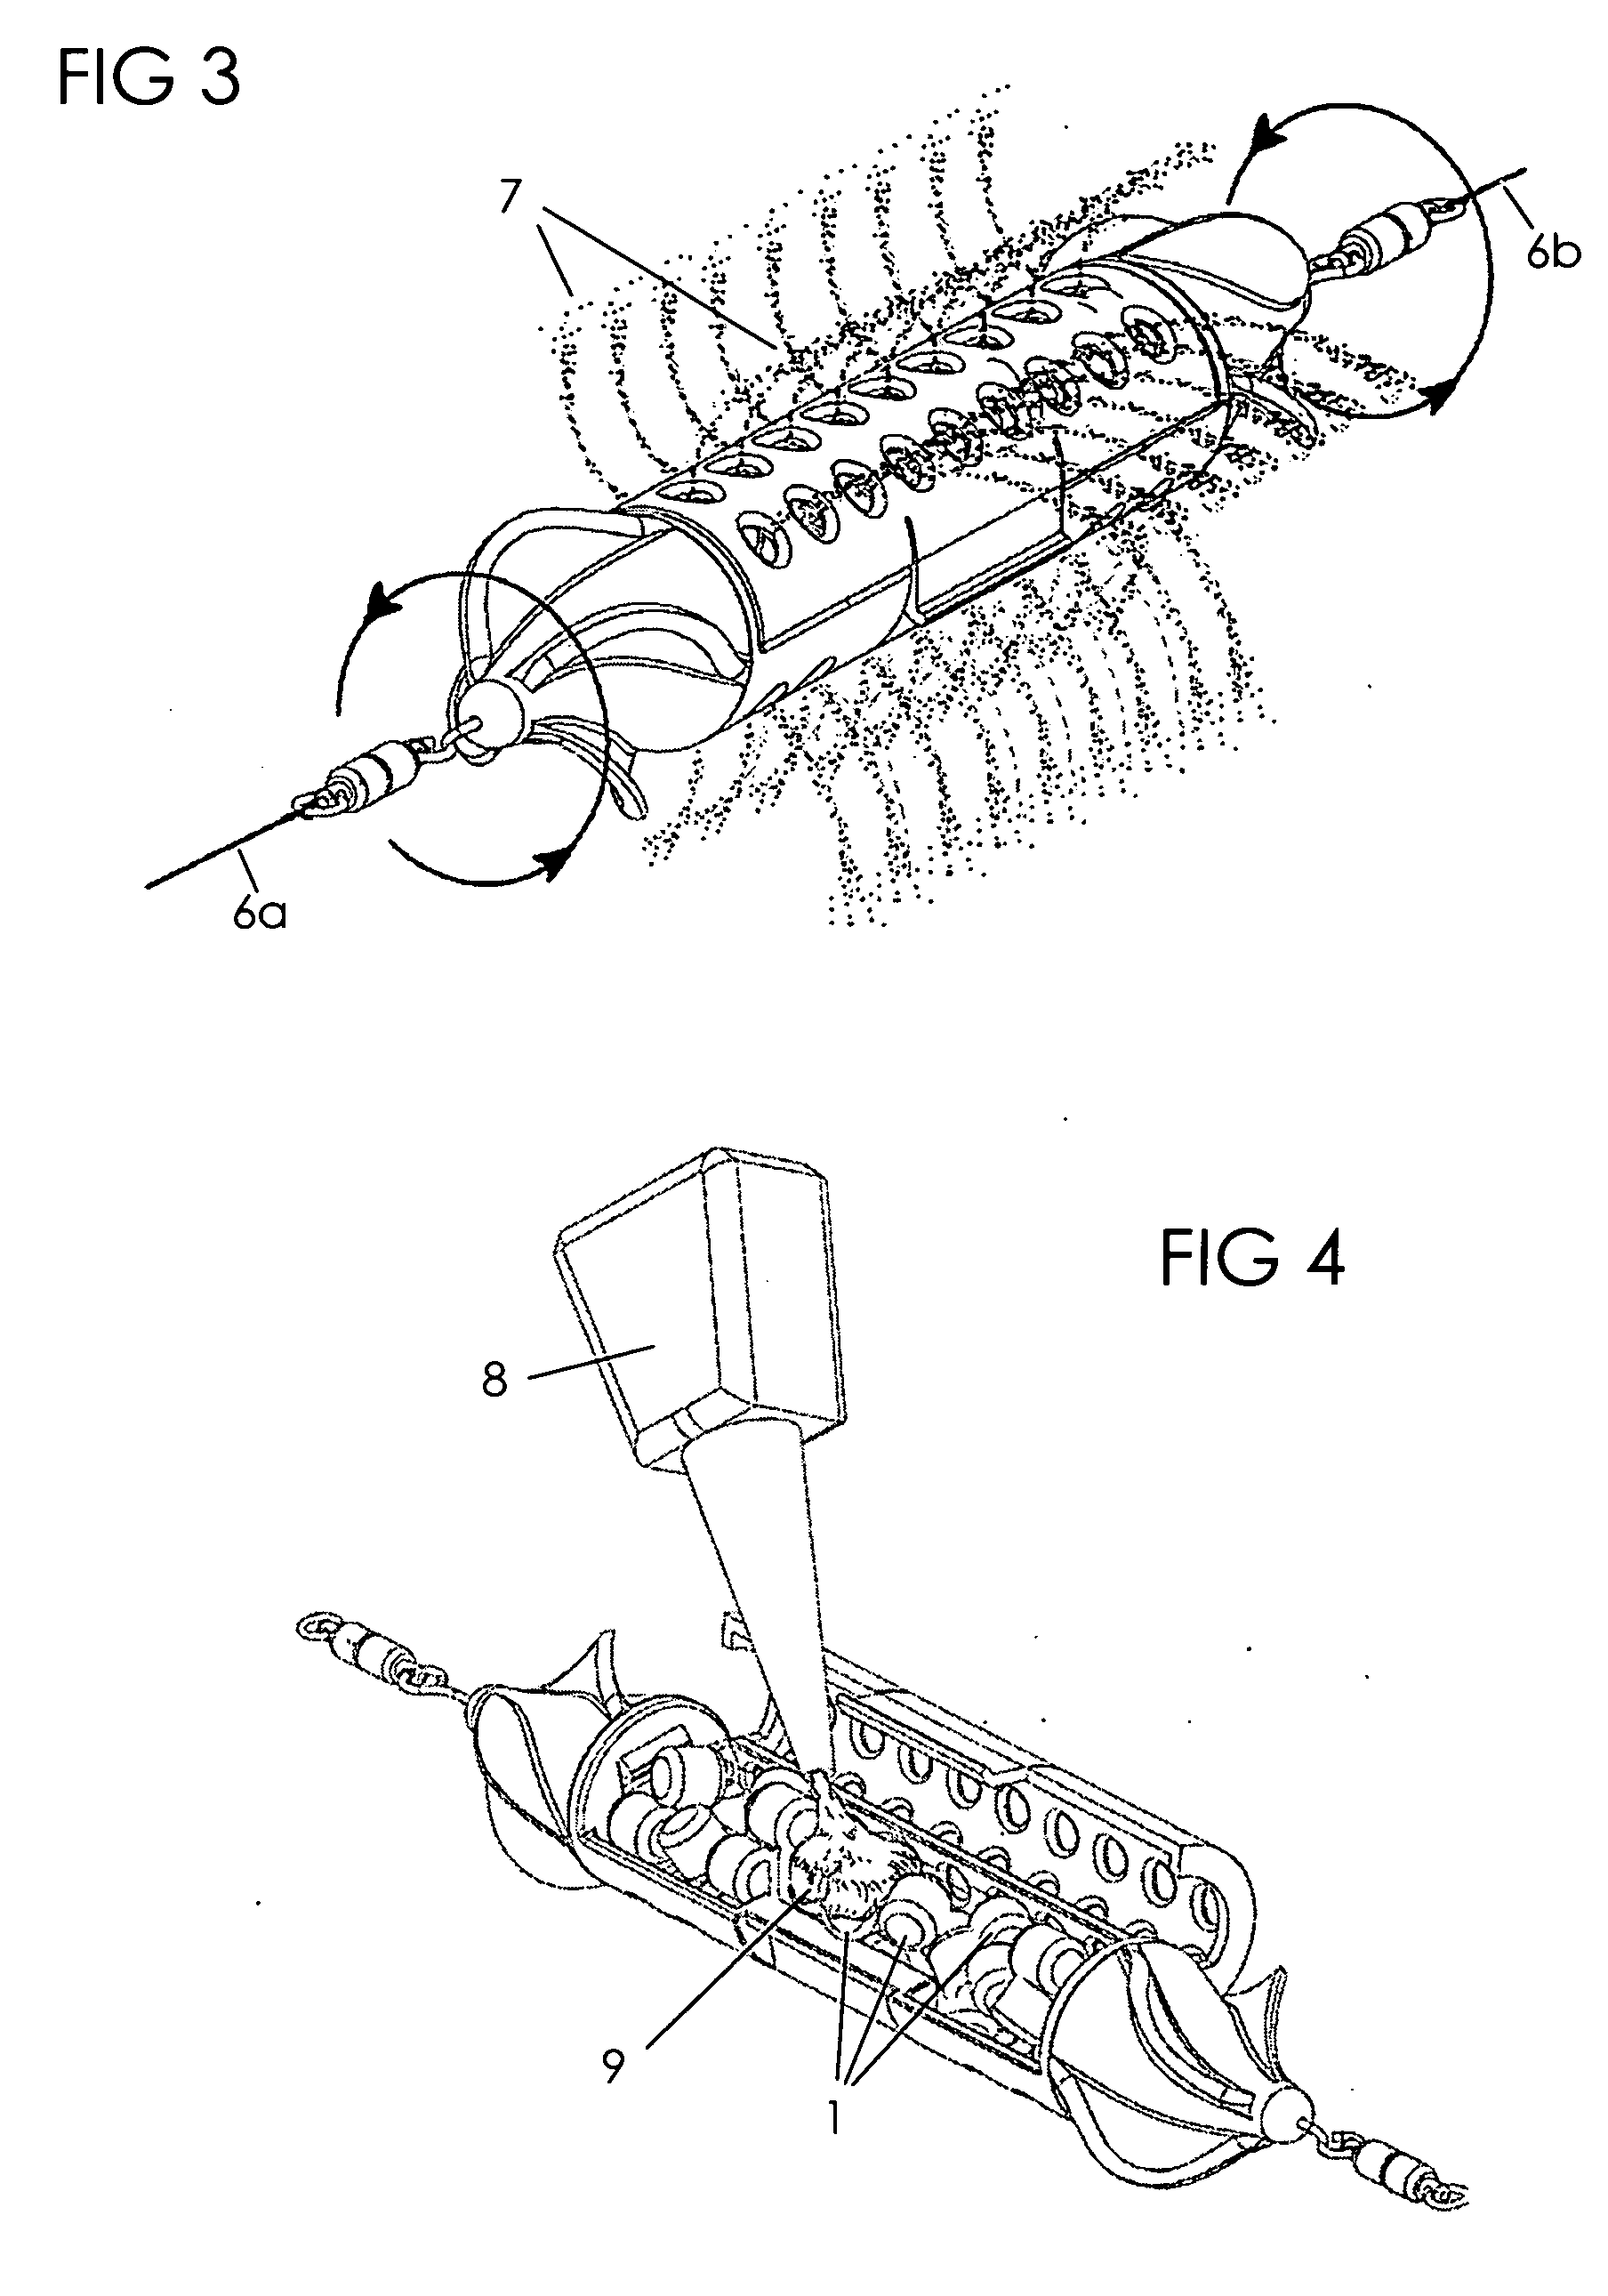 Scent releasing/absorbing system for an in-line, rotating fishing chum and/or fishing scent dispenser